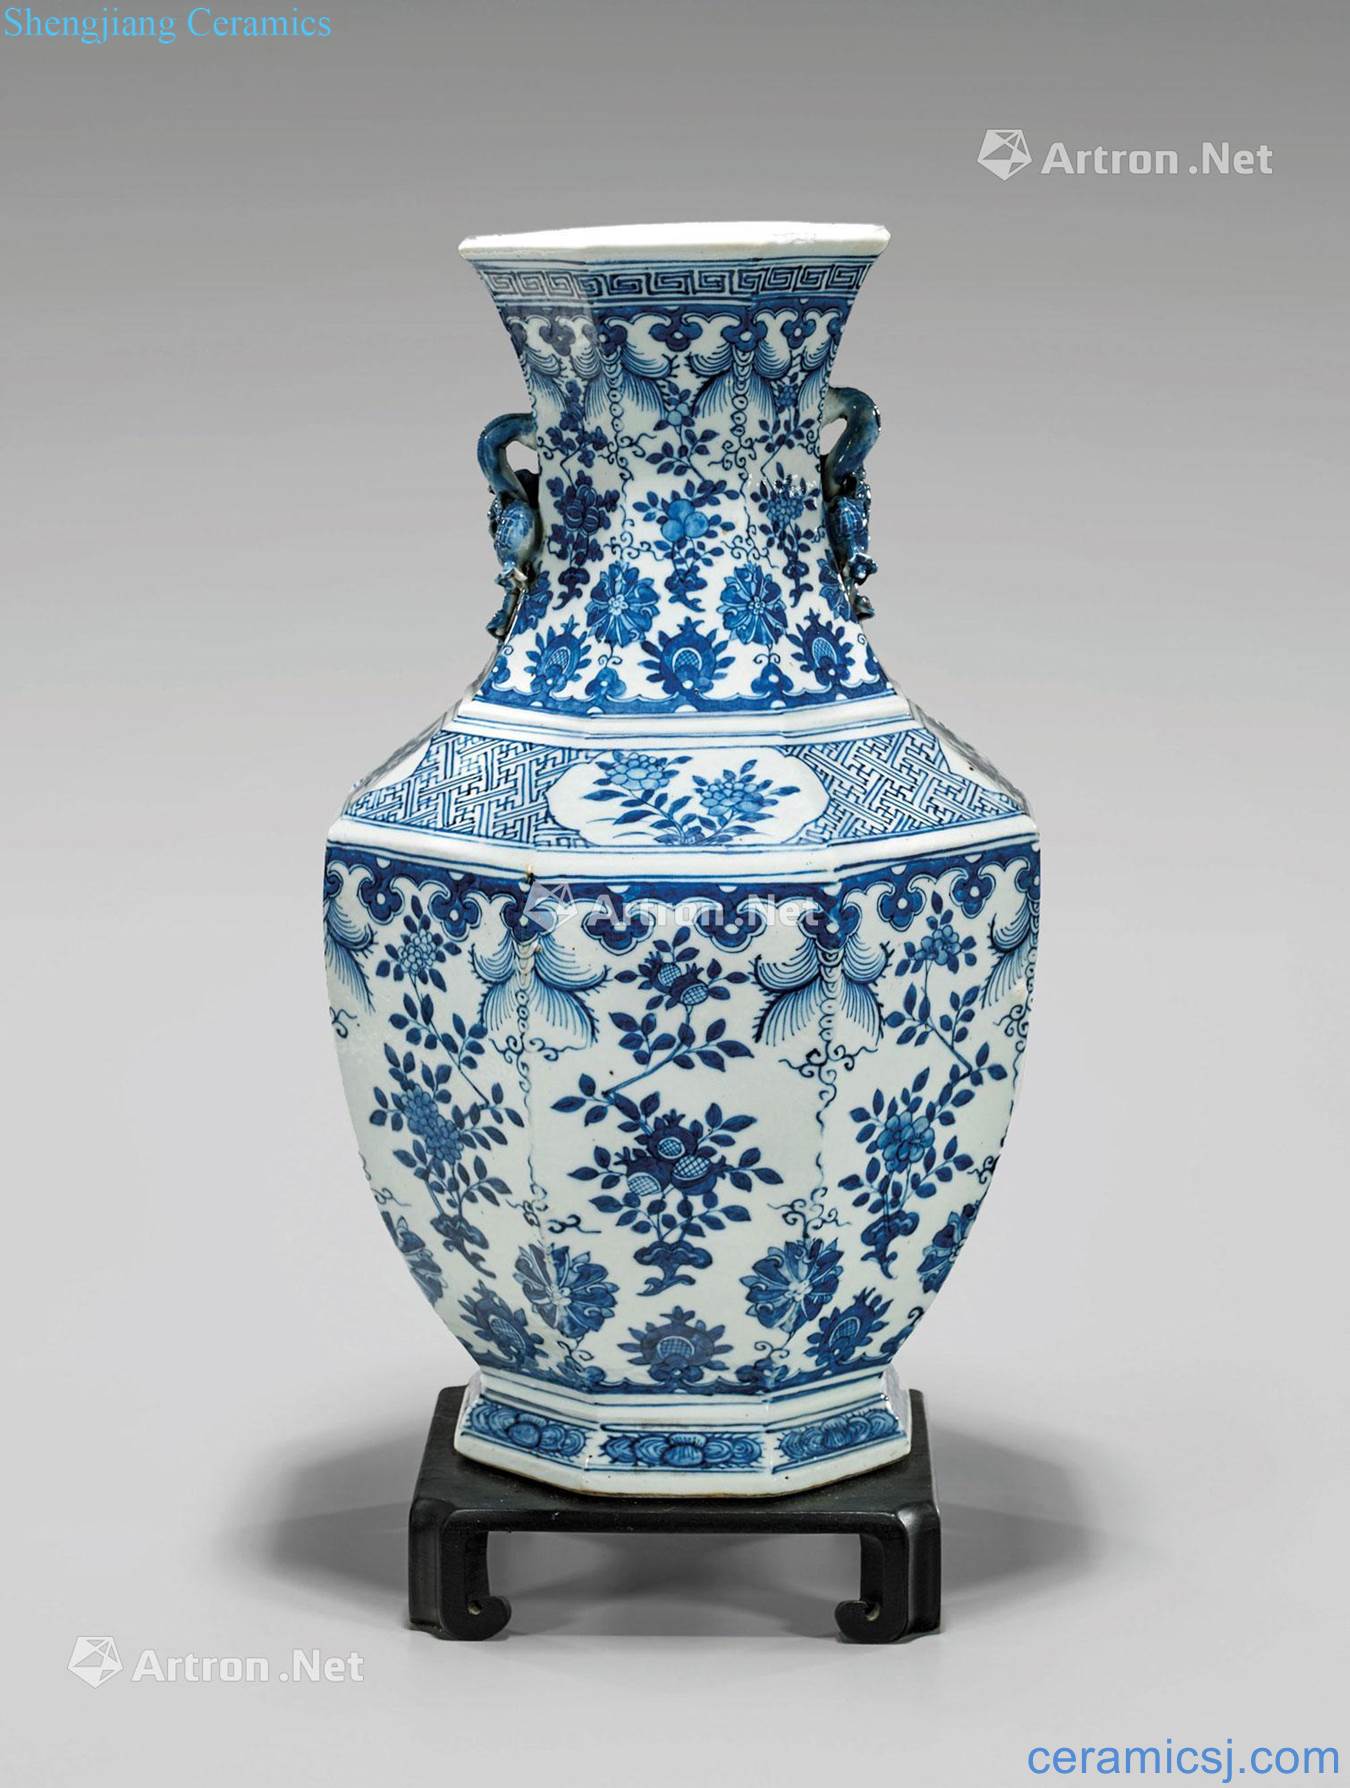 The antique blue and white porcelain